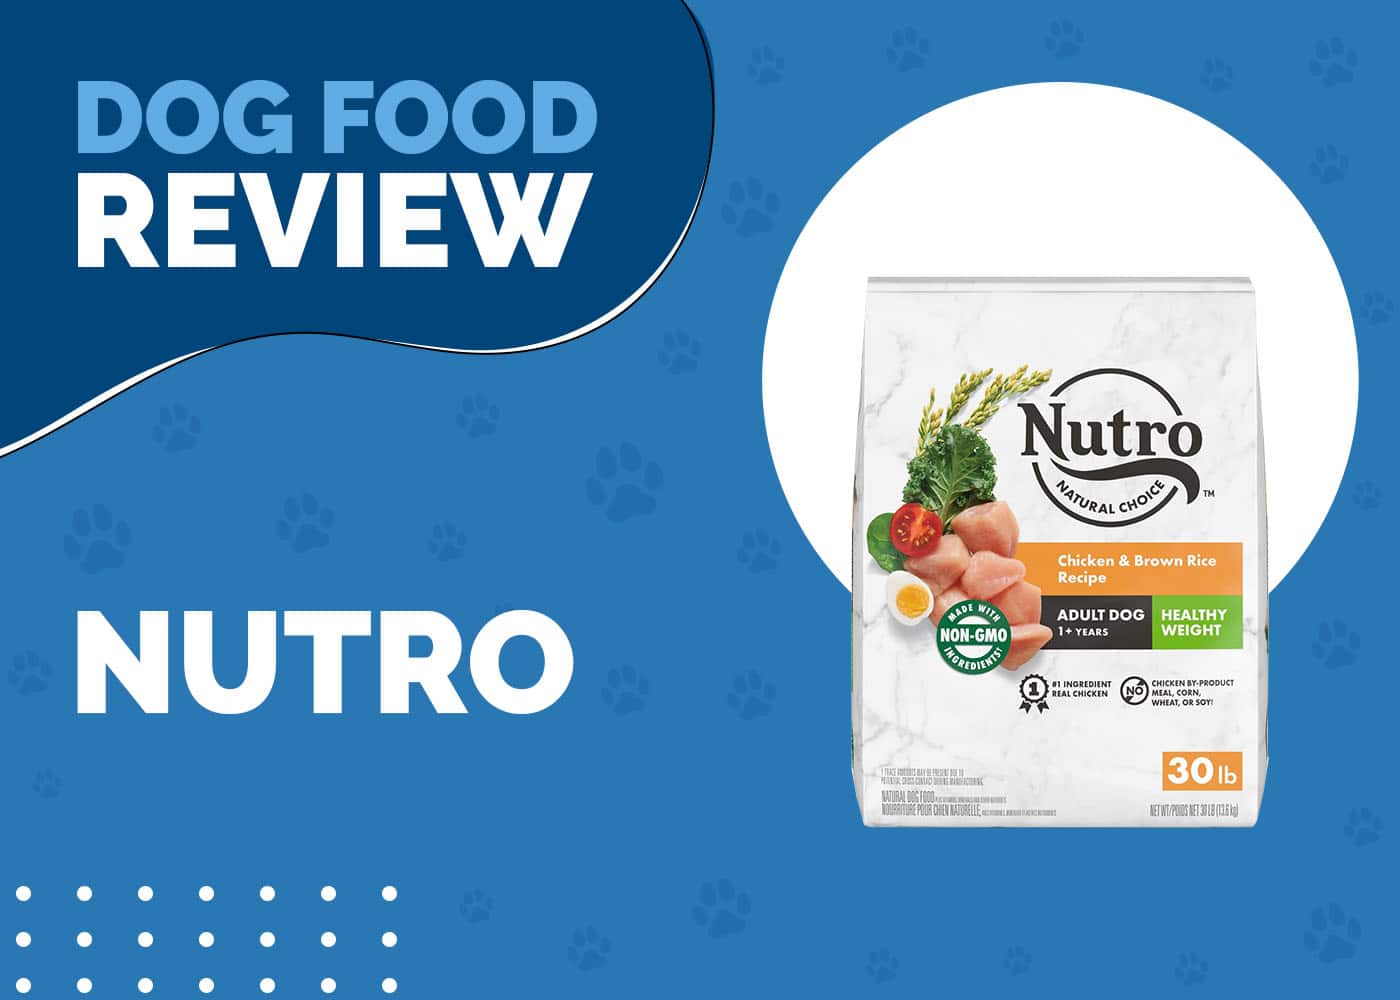 Nutro Dog Food Review